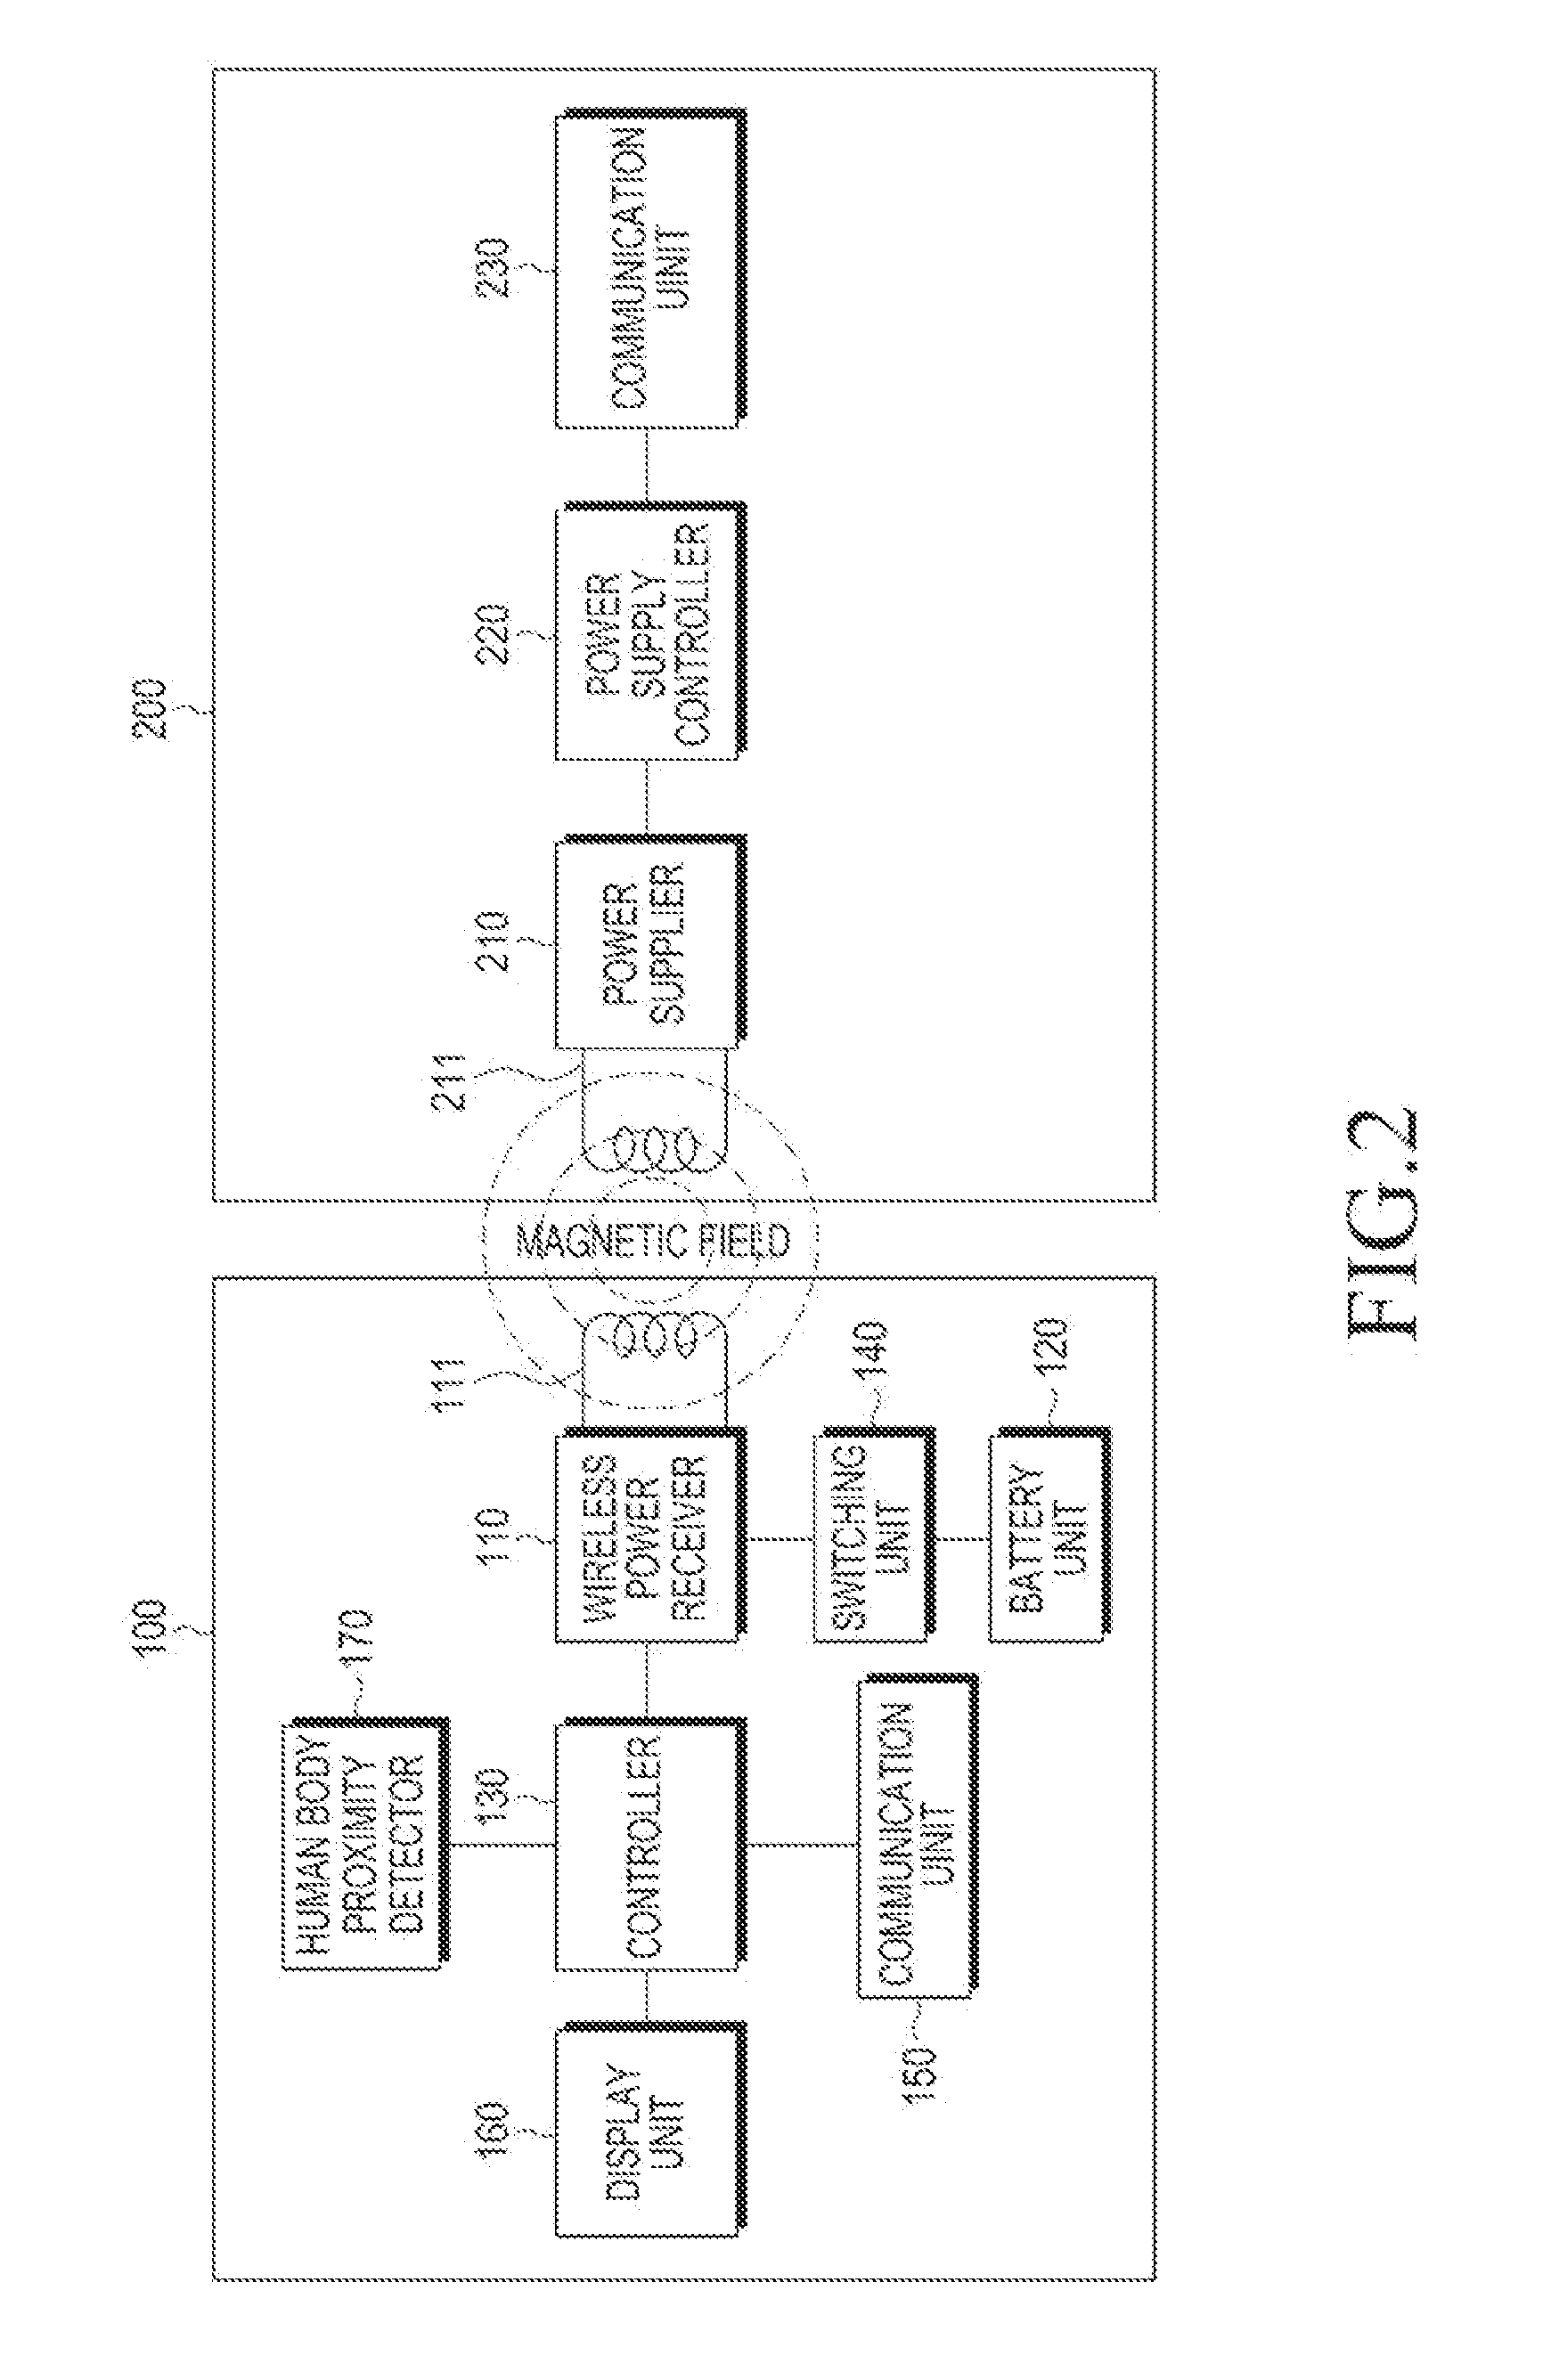 Apparatus and method for wireless charging